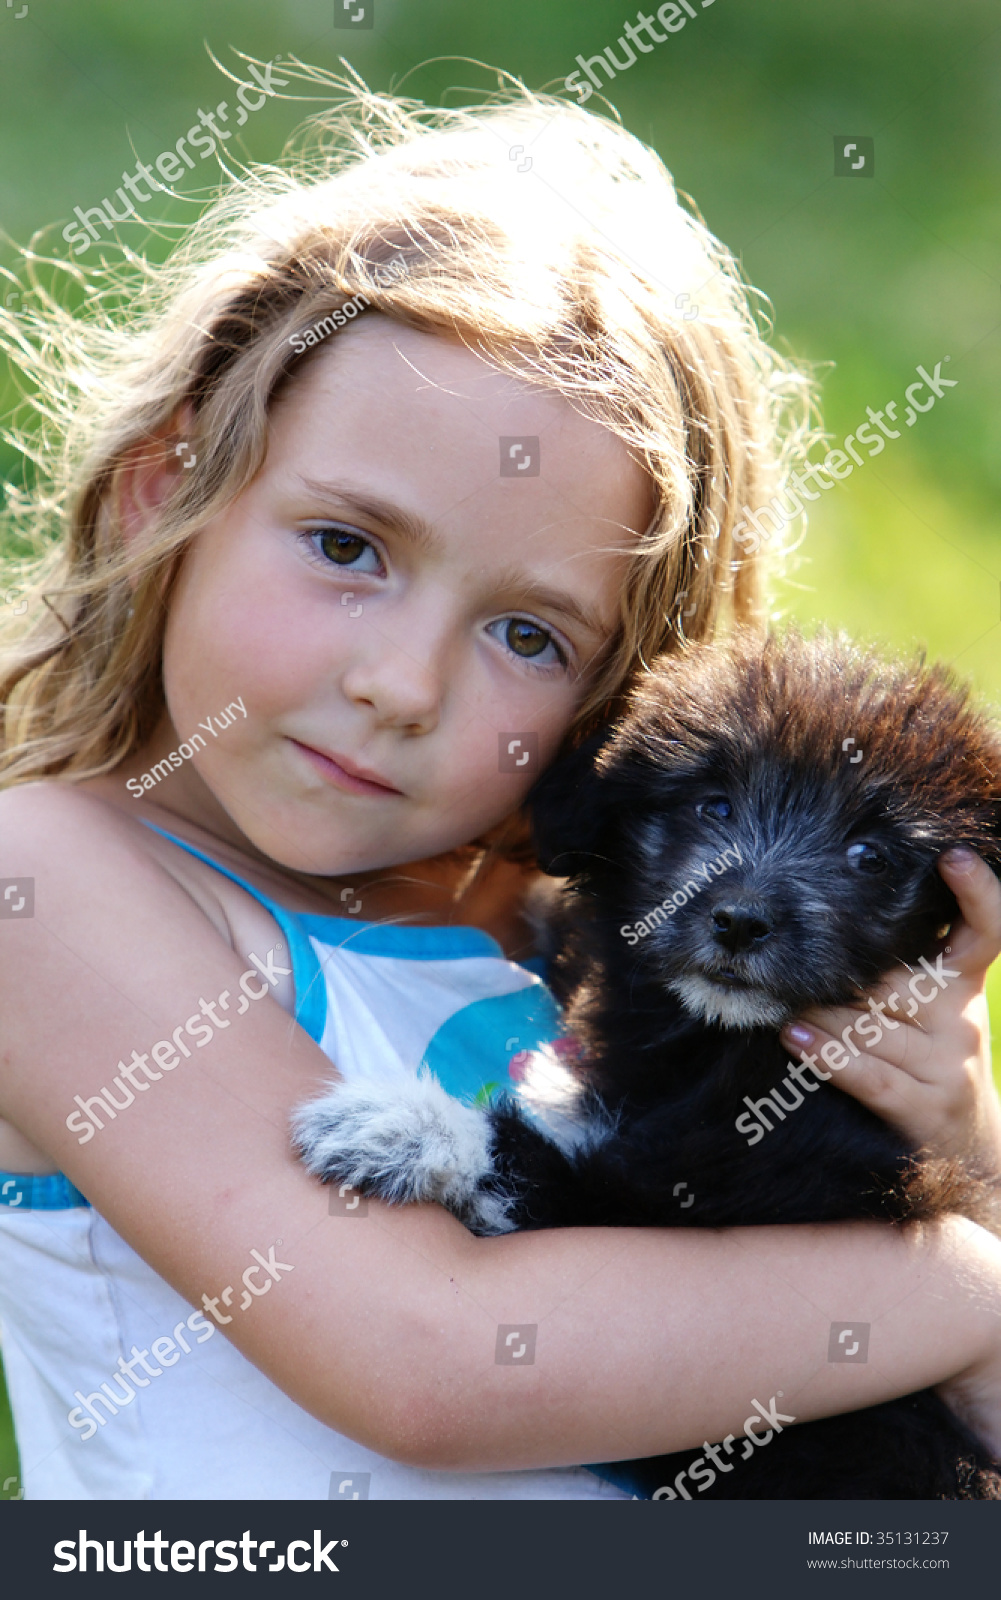 Smiling Little Girl Hugging A Big Black Dog In An Outdoor Setting Stock ...